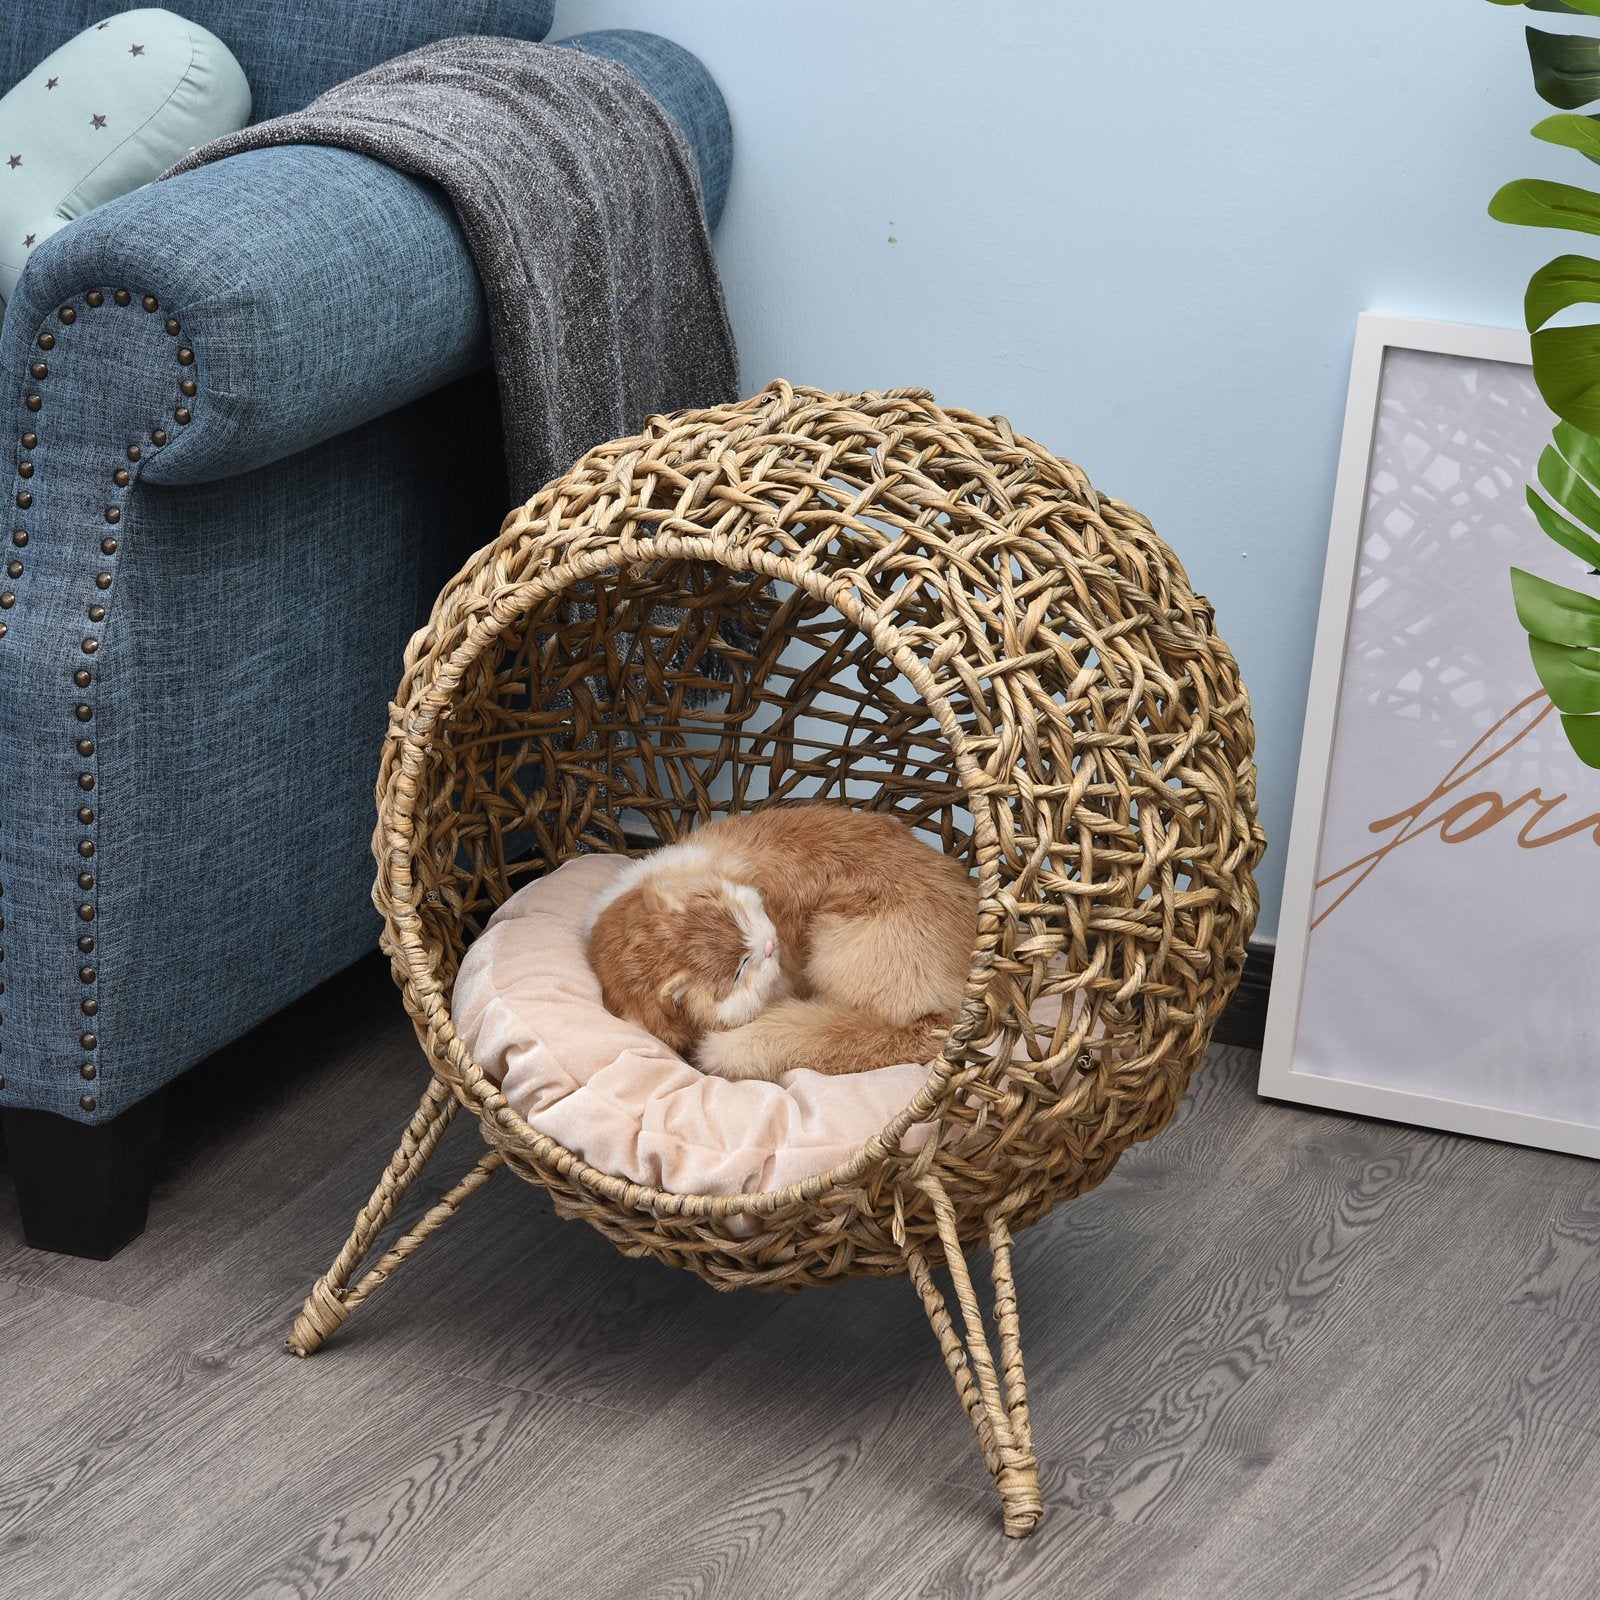 Cats Elevated Plastic Wicker Dome Bed